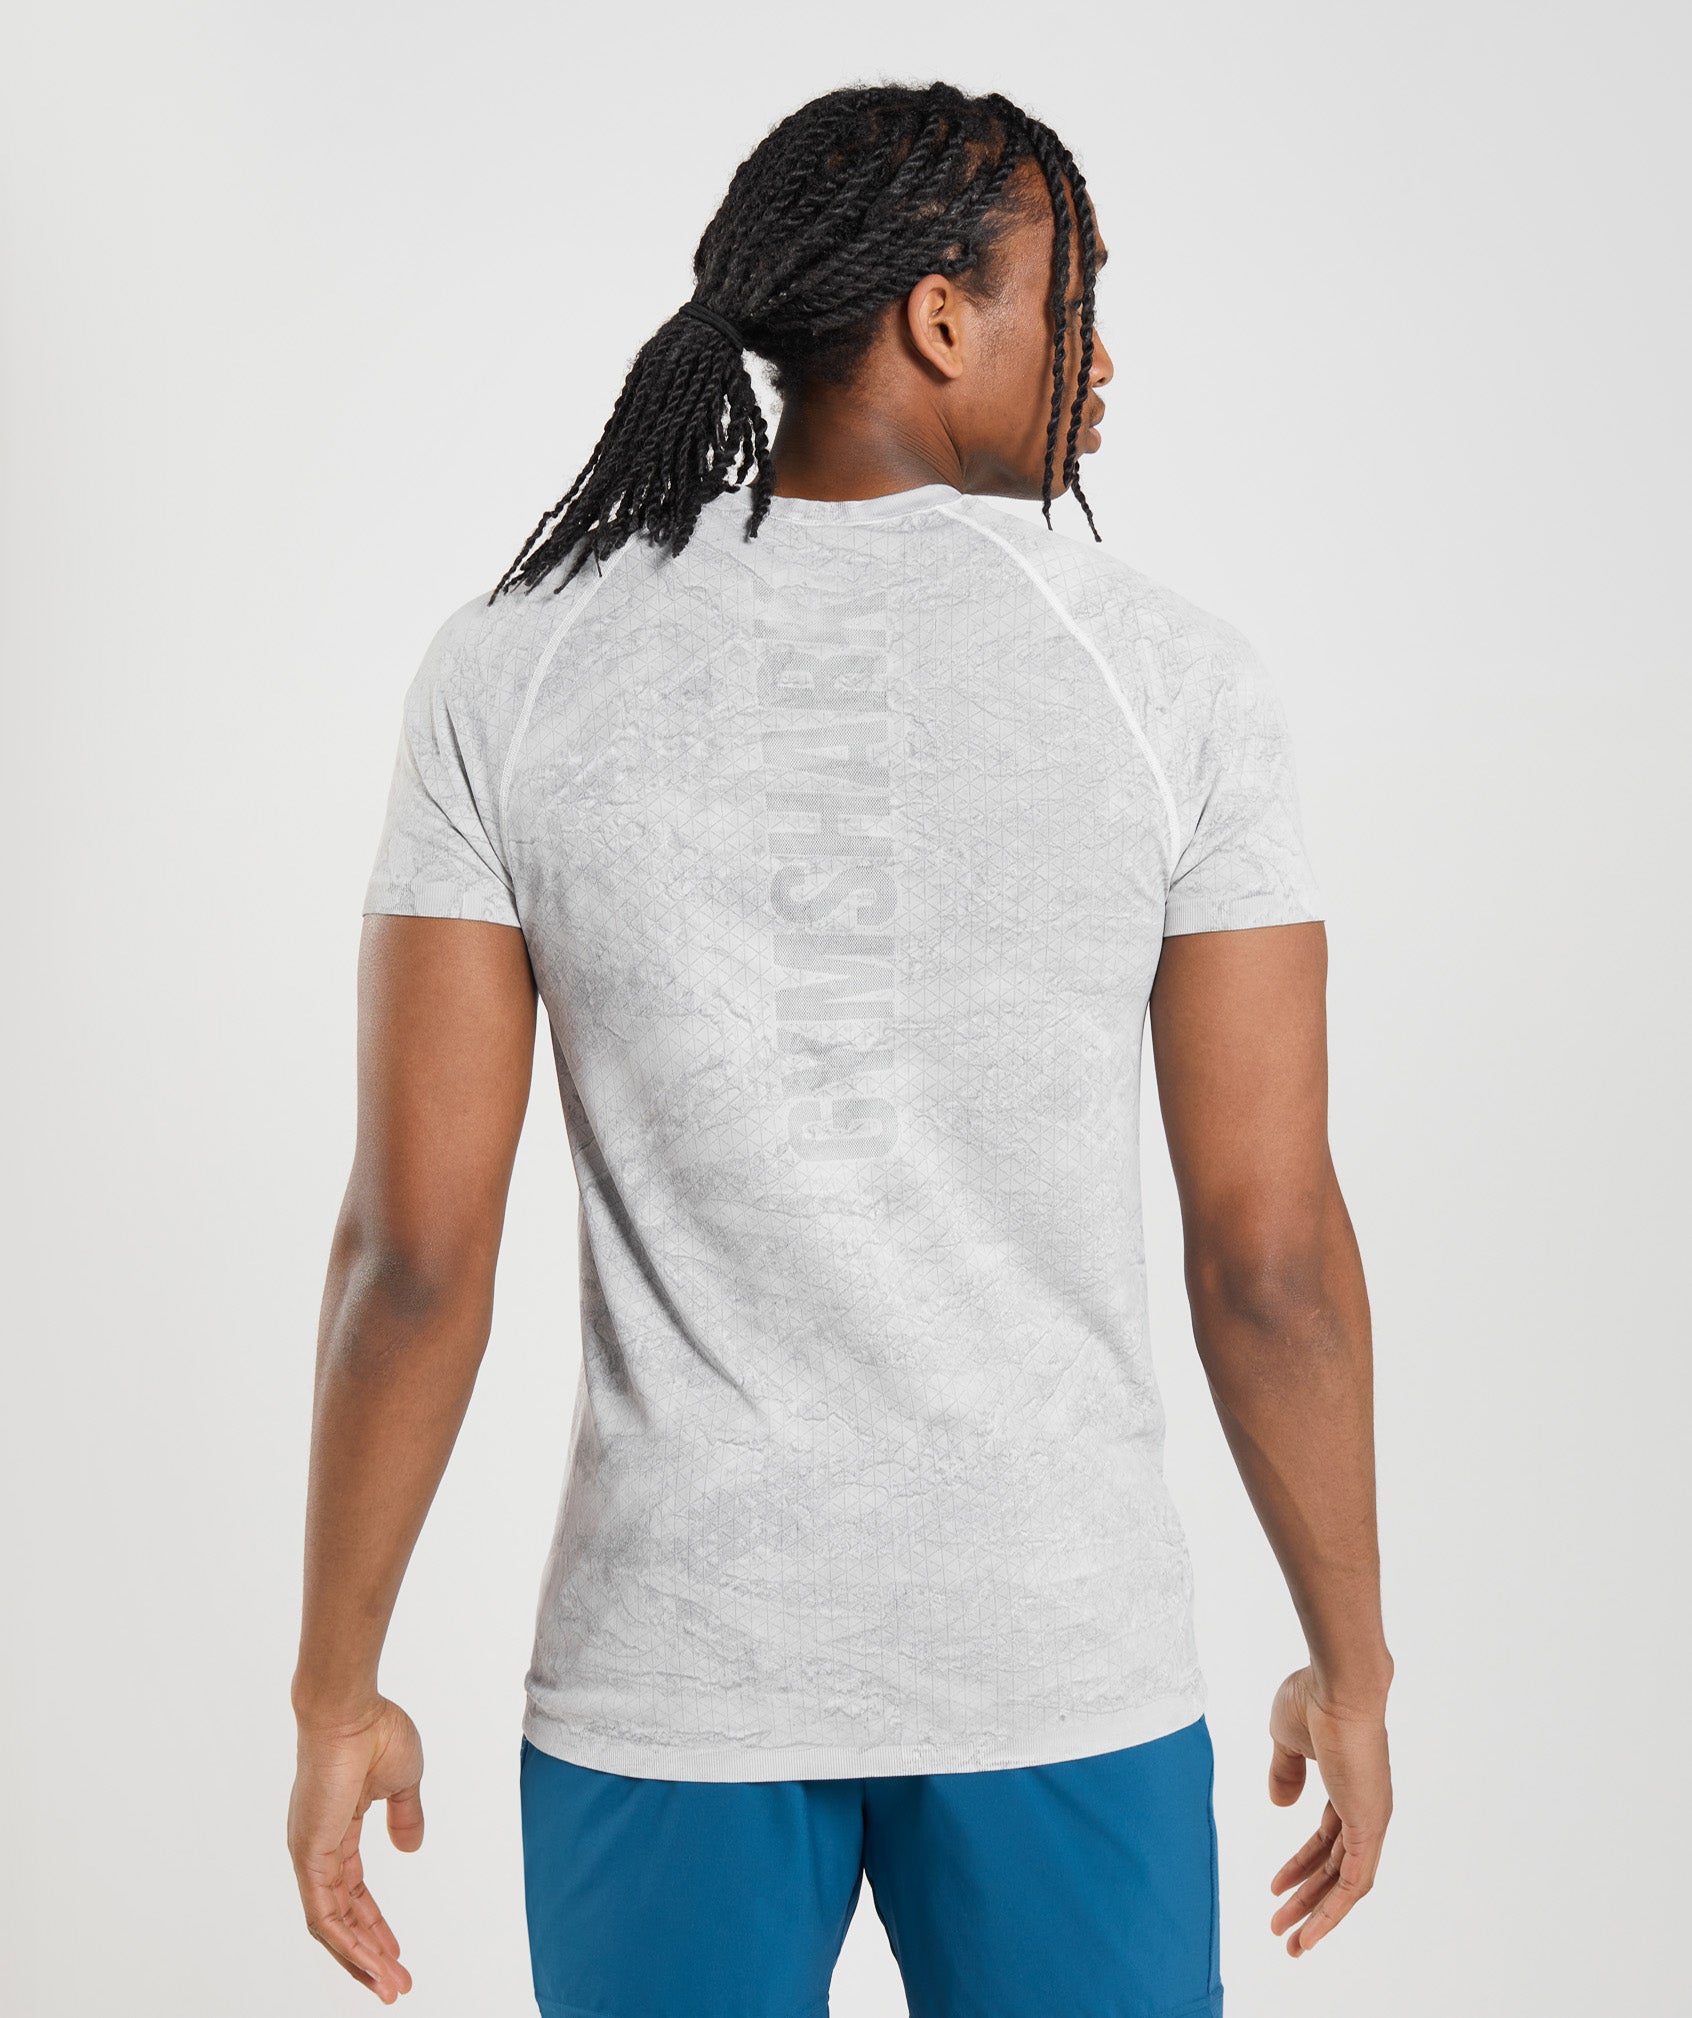 Geo Seamless T-Shirt in Off White/Light Grey - view 2